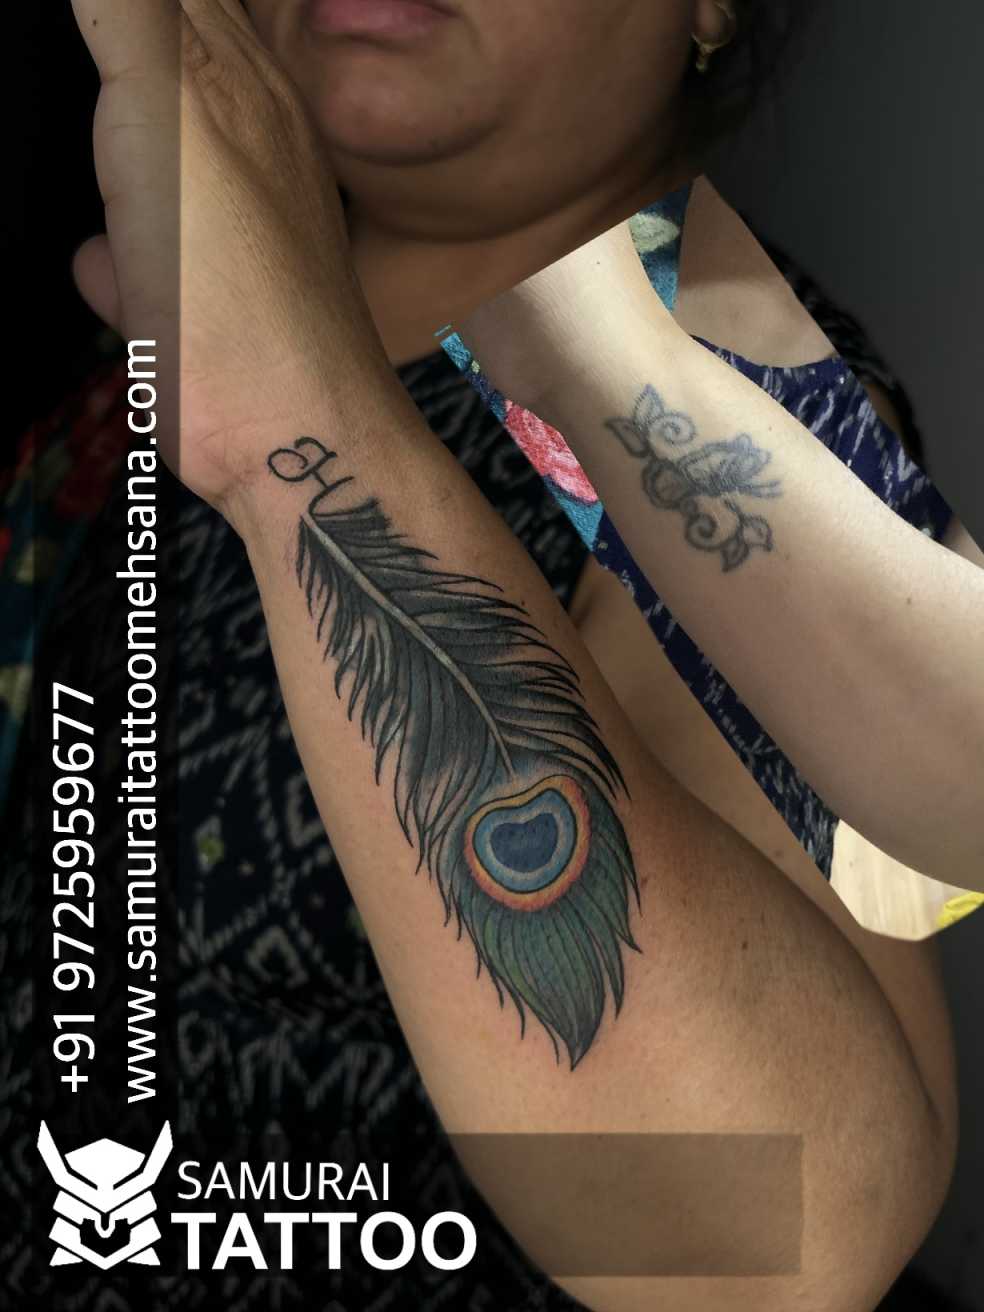 Tattoo uploaded by Vipul Chaudhary • Cover up tattoo Coverup